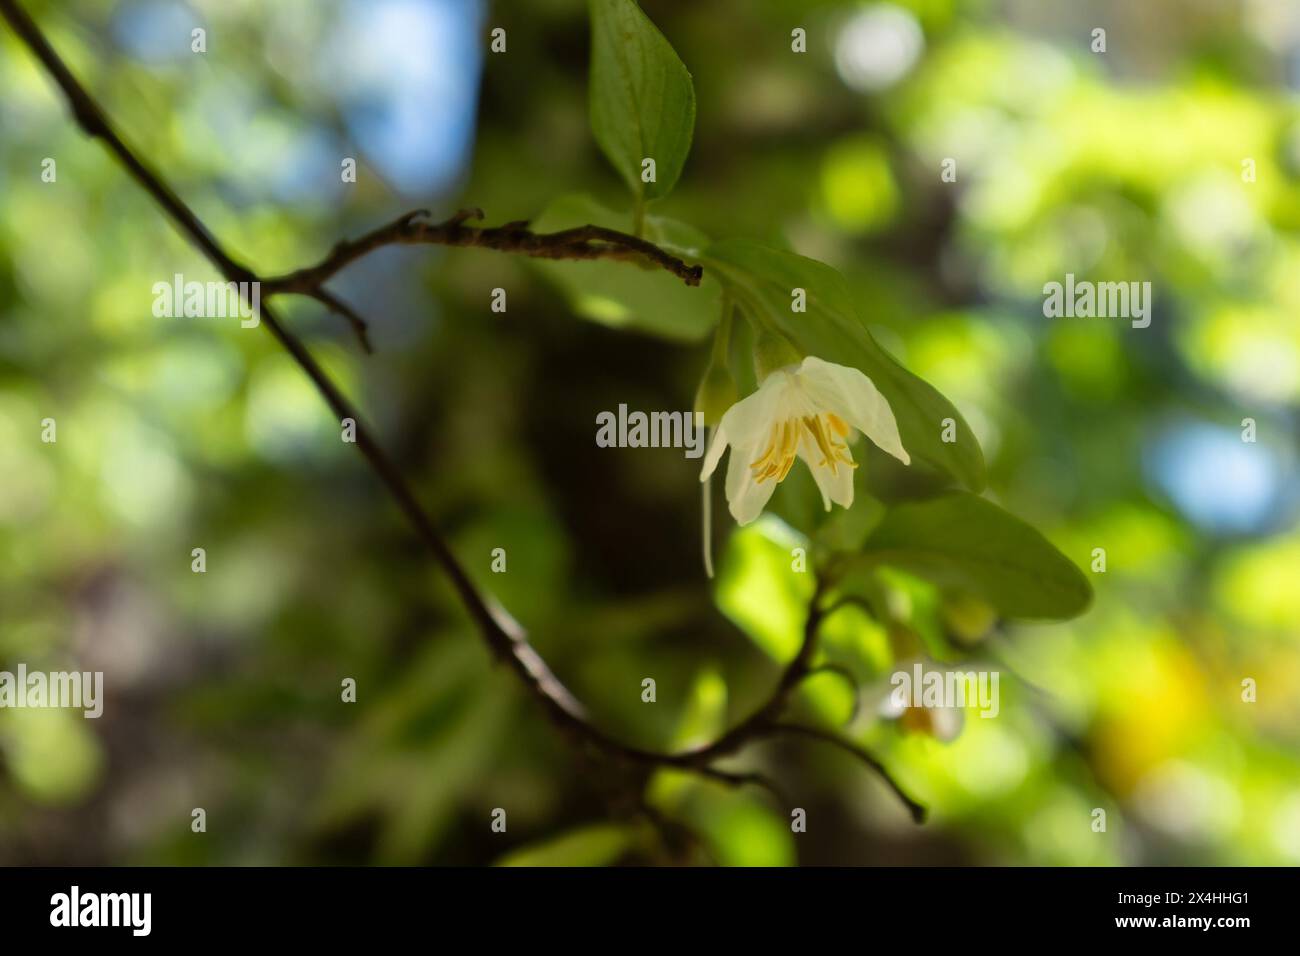 Closeup of the yellow stamen of the white flower of a drug snowbell (Styrax officinalis) Stock Photo